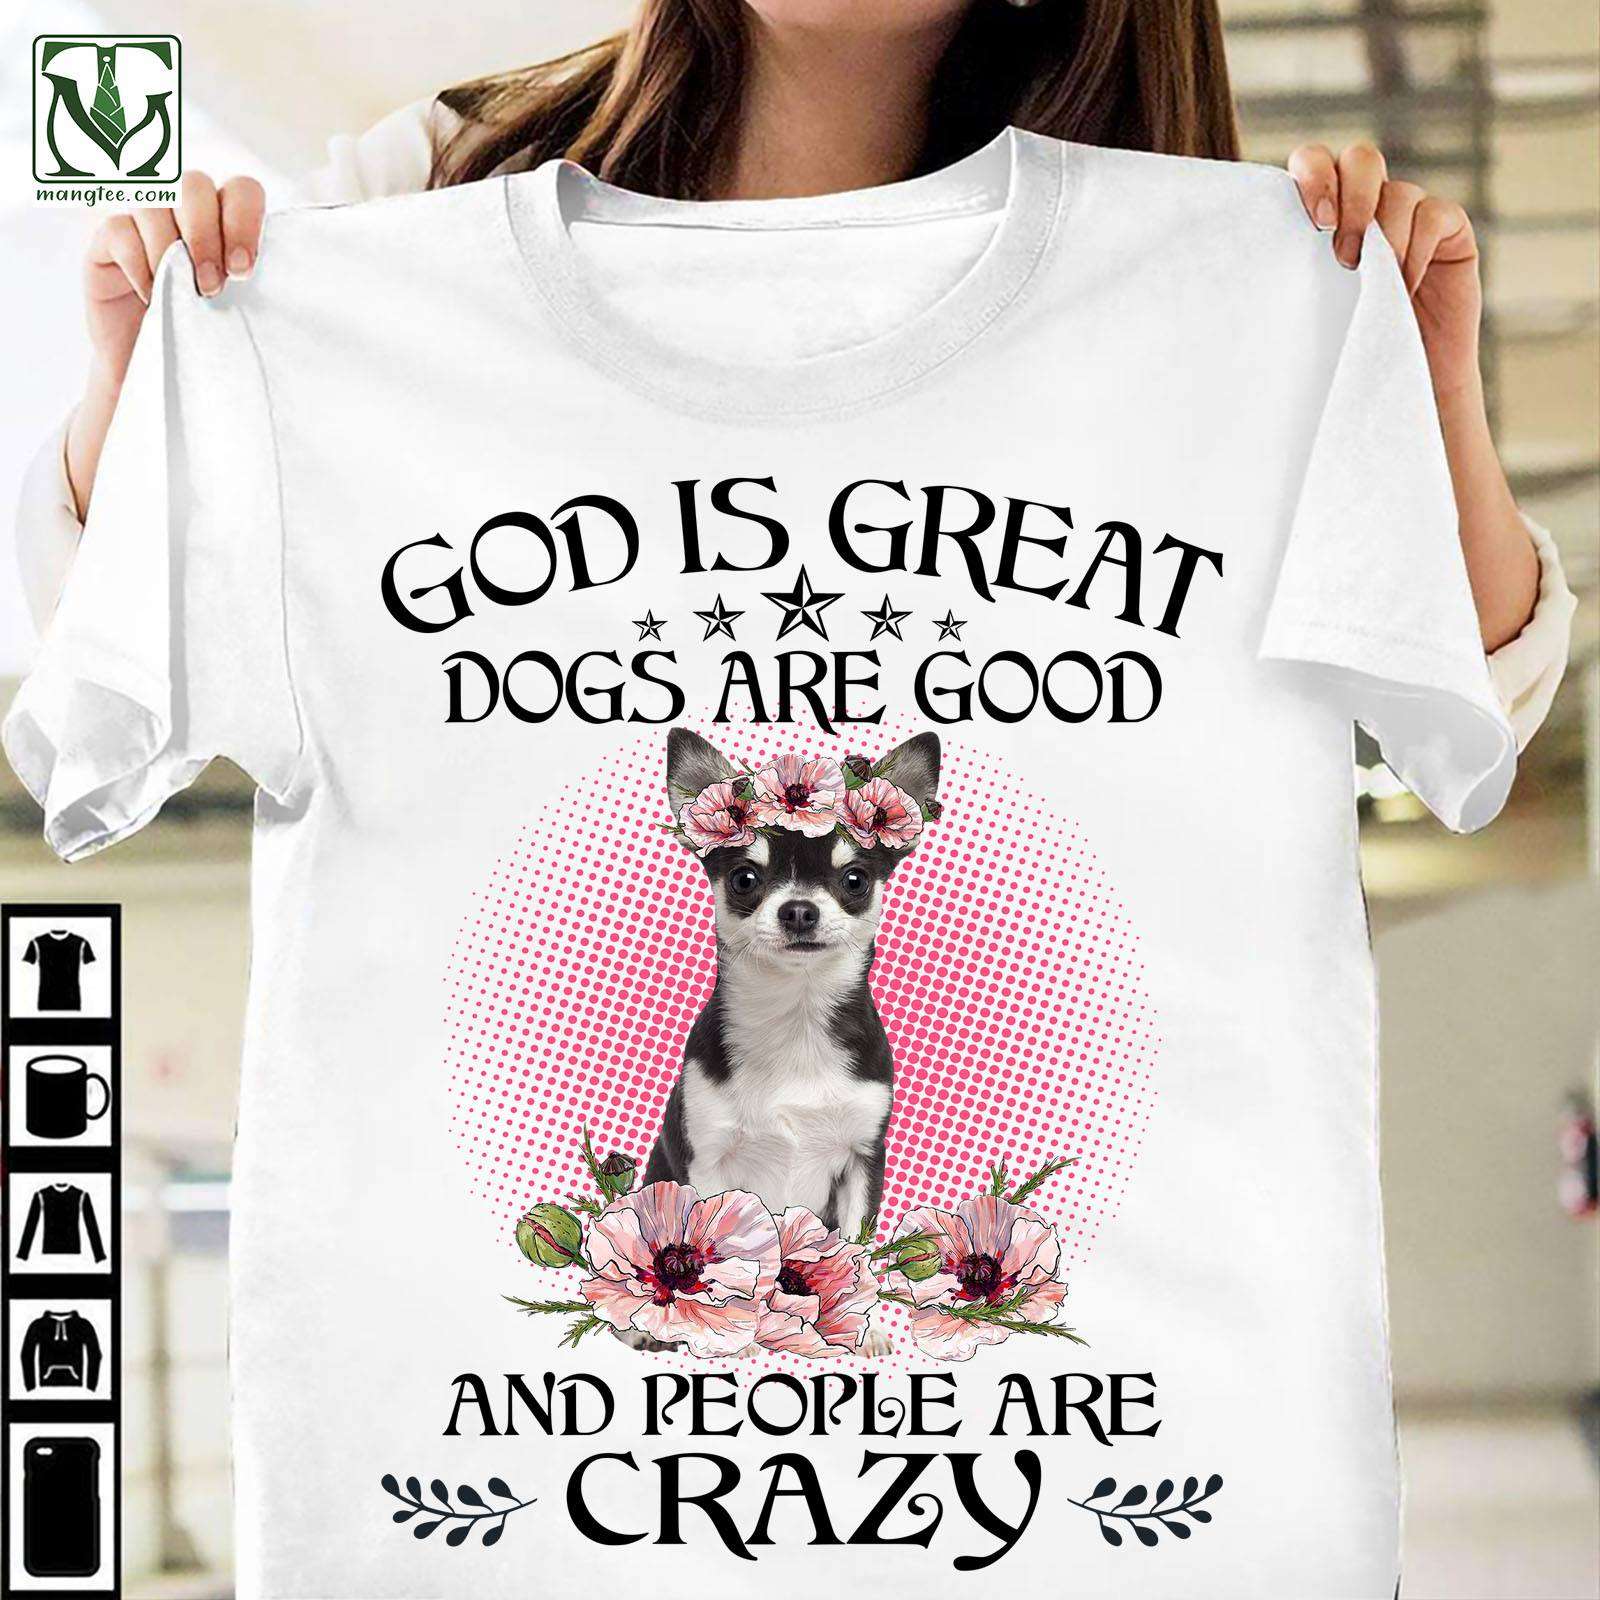 Chiahuahua Flower - God is great dogs are good and people are crazy